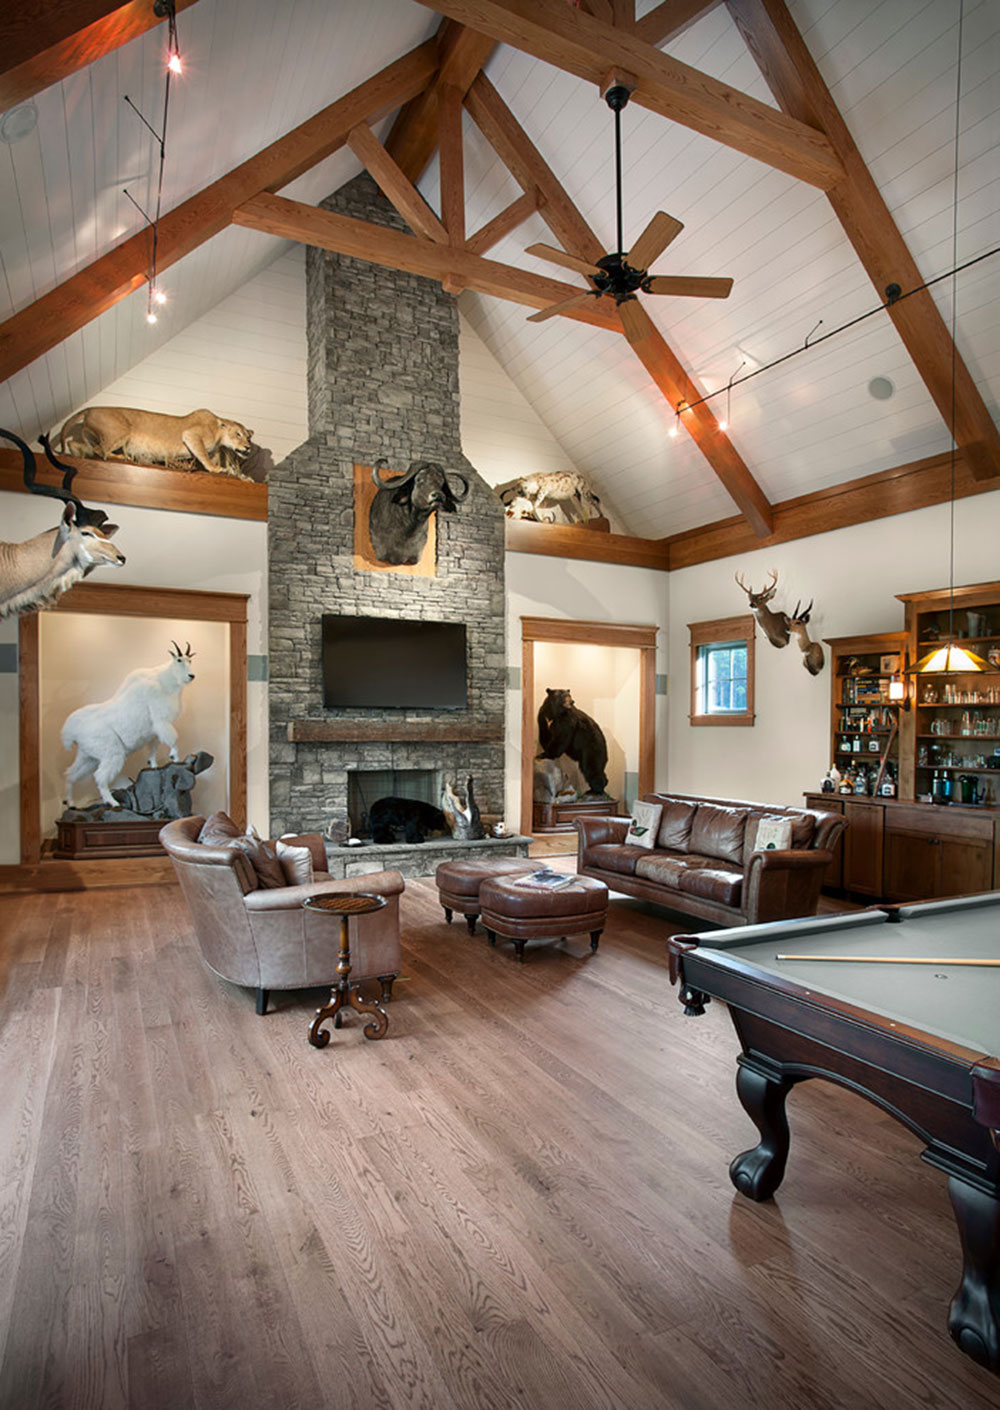 Man-Caves-Are-A-Great-Place-To-Take-It-Easy-After-A-Long-Day32 Man Cave Design Ideas and Furniture